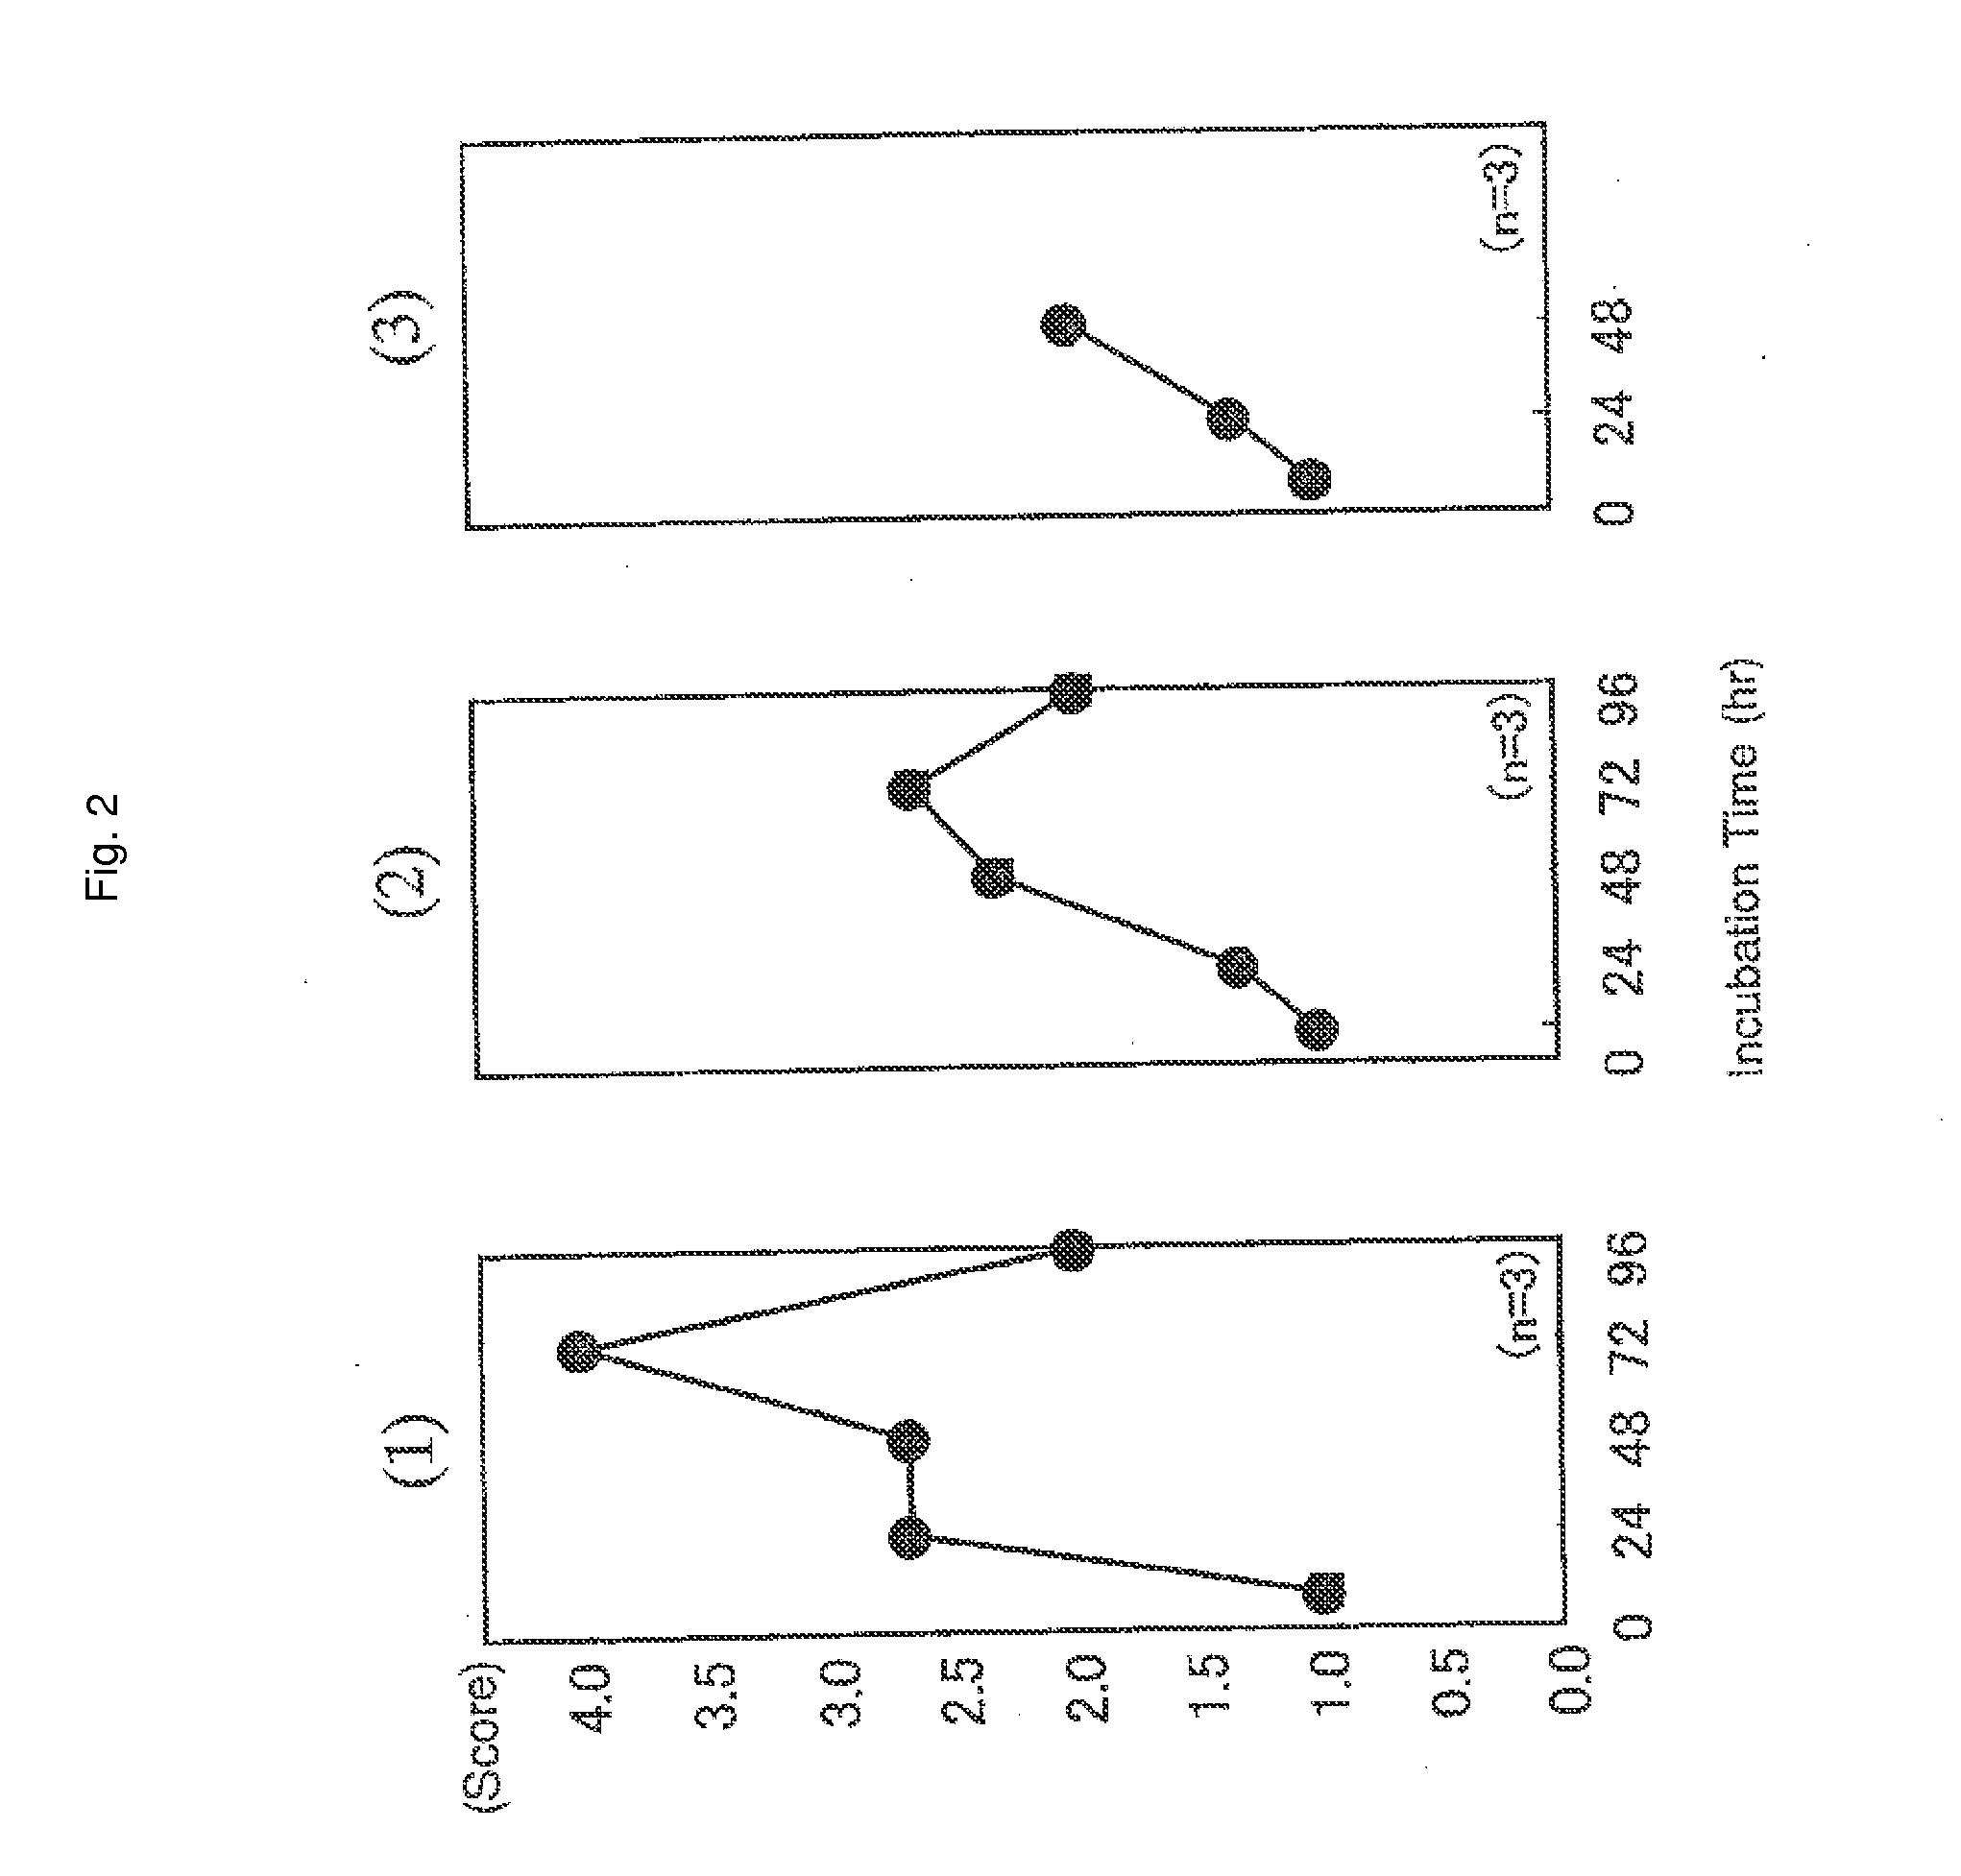 Equol-producing lactic acid bacteria-containing composition